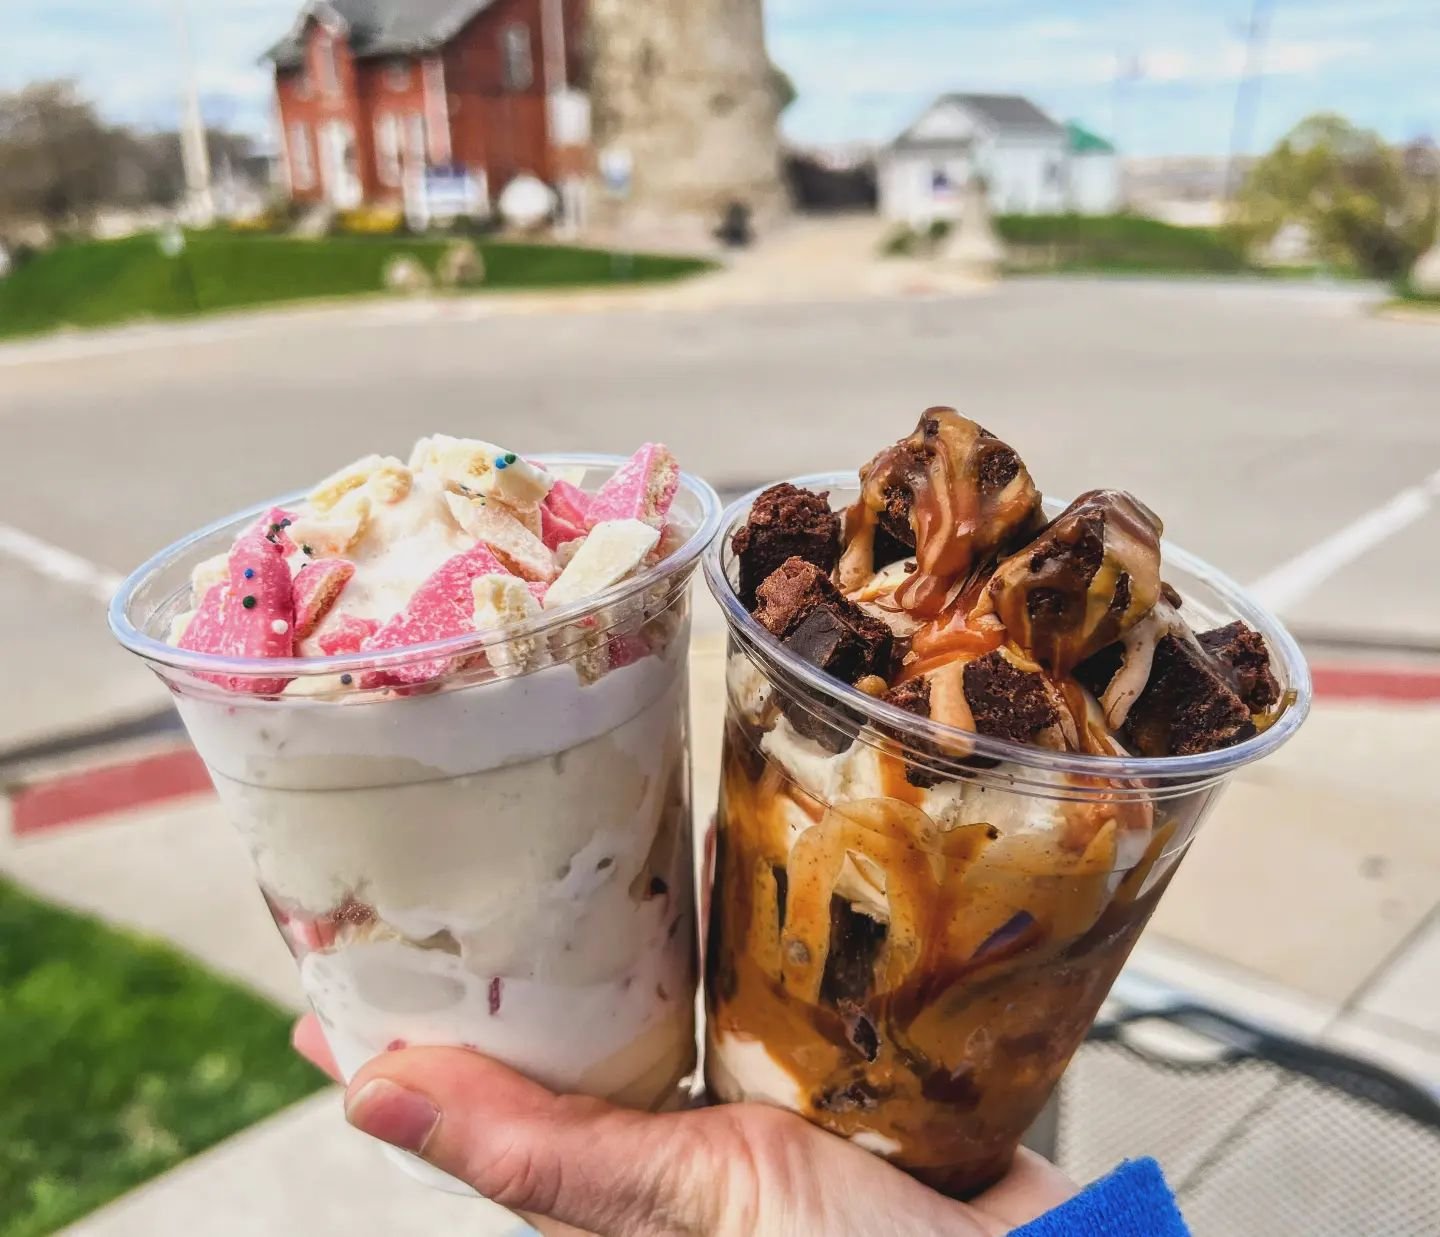 Today kicks off national volunteer appreciation week and we're kicking off our 2 sundae specials --
MUDROOM NEEDED SUNDAE
&bull; layers of vanilla ice cream + house brownie chunks, our house caramel &amp; peanut butter sauce &bull;

ANIMAL HOUSE SUND